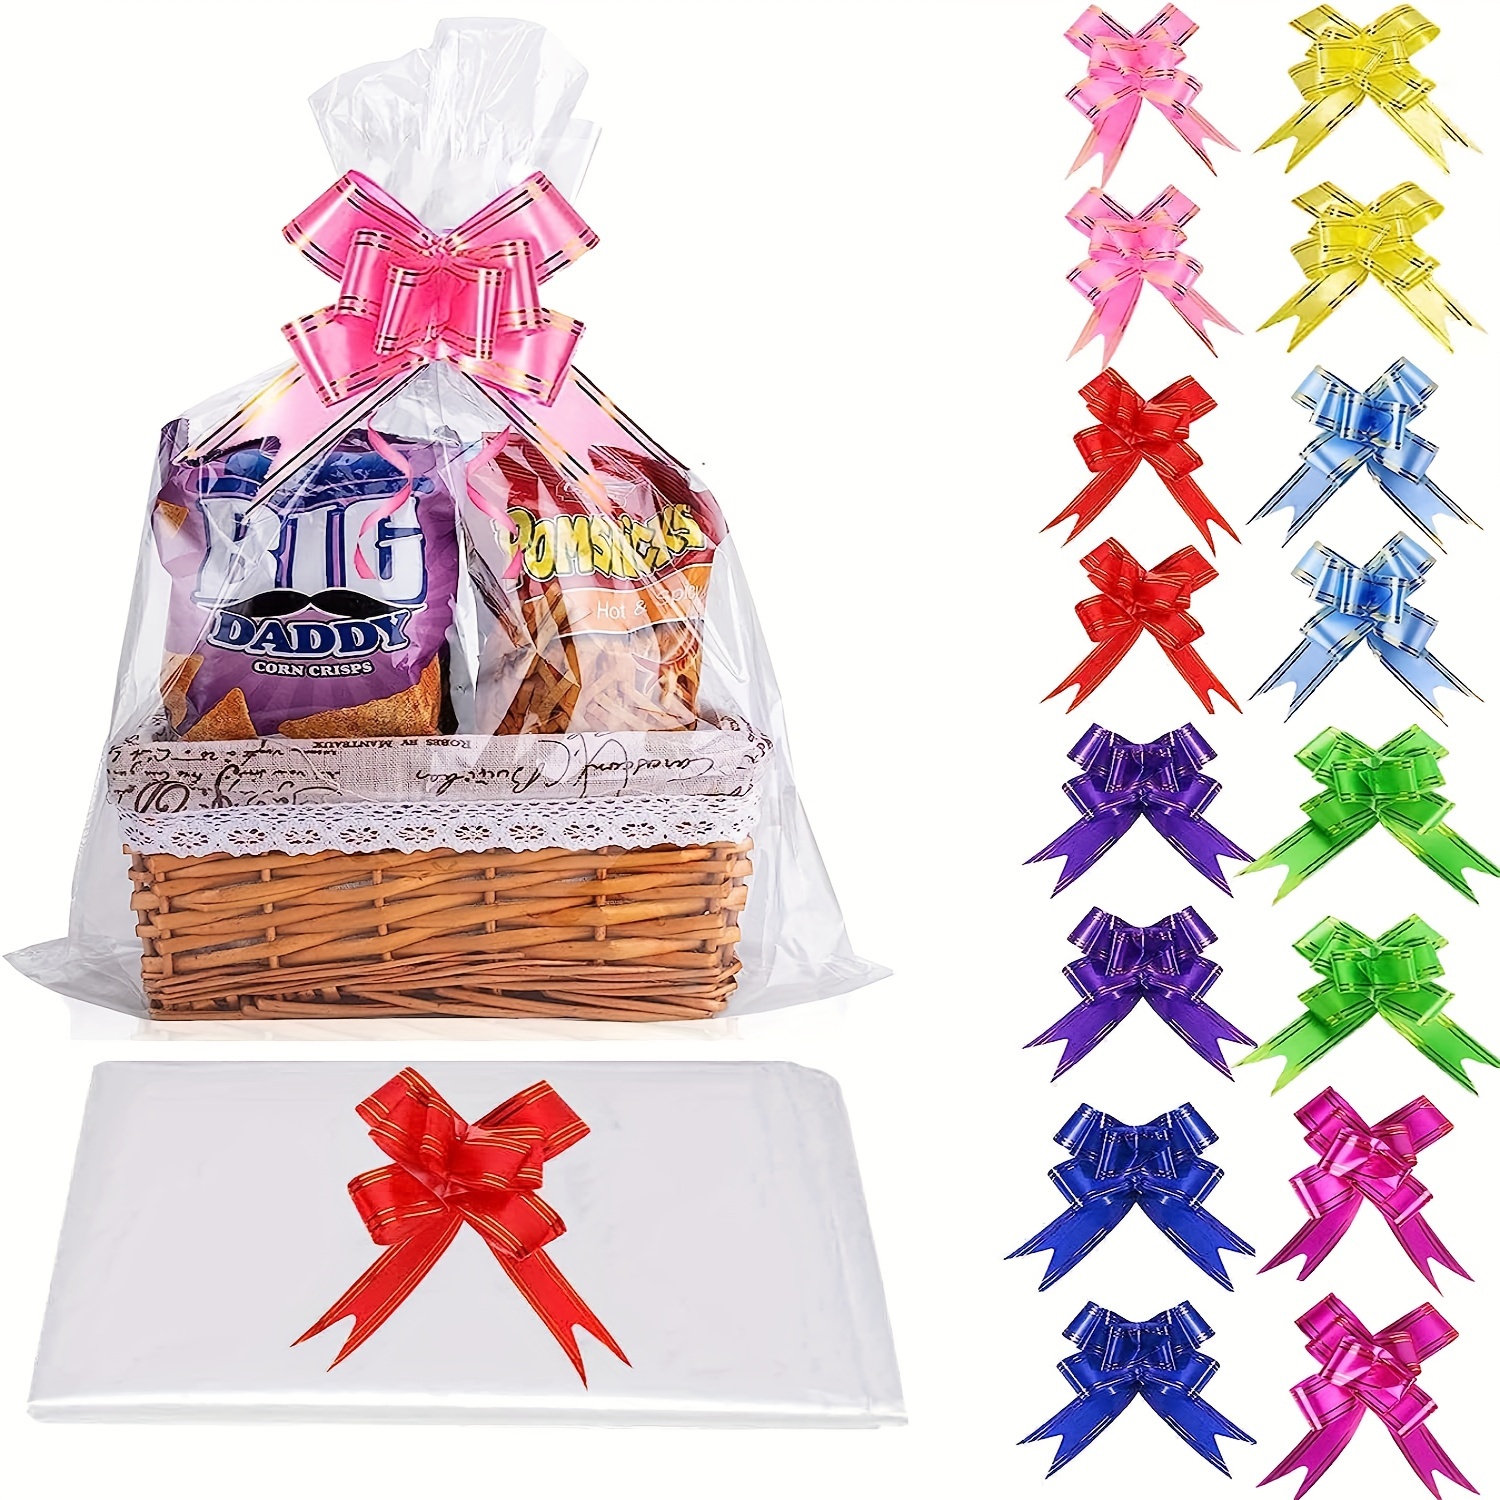 

16pcs/set Large Jumbo Cellophane Bags For Gift Basket, Large Cellophane Wrap Bags Basket Packaging Bags With 16pcs Bows For Mother's Day Gift Packages Fruit Basket, 40 X 28 Inch